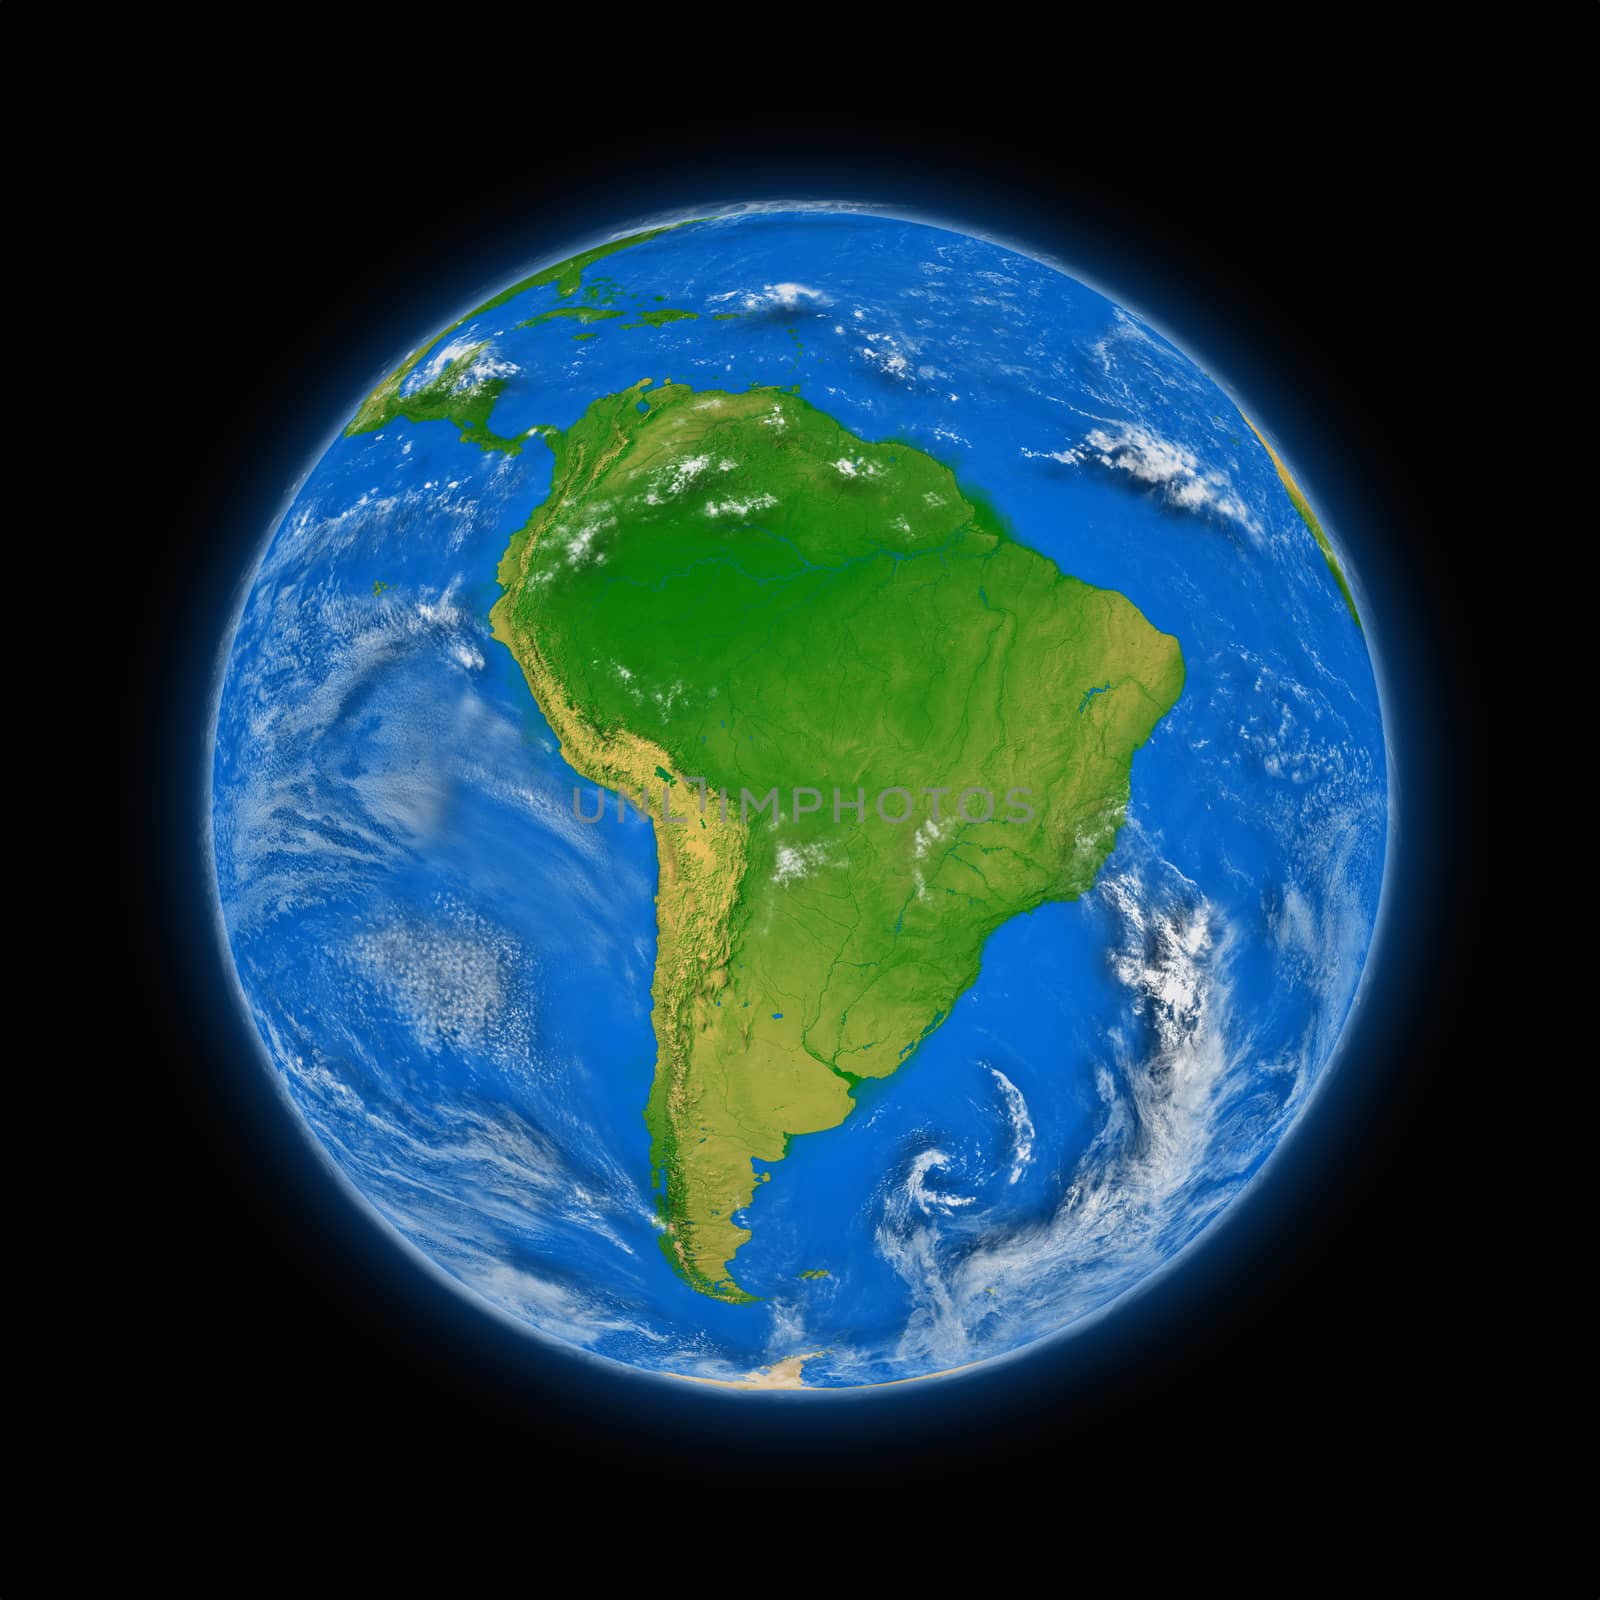 South America on planet Earth by Harvepino